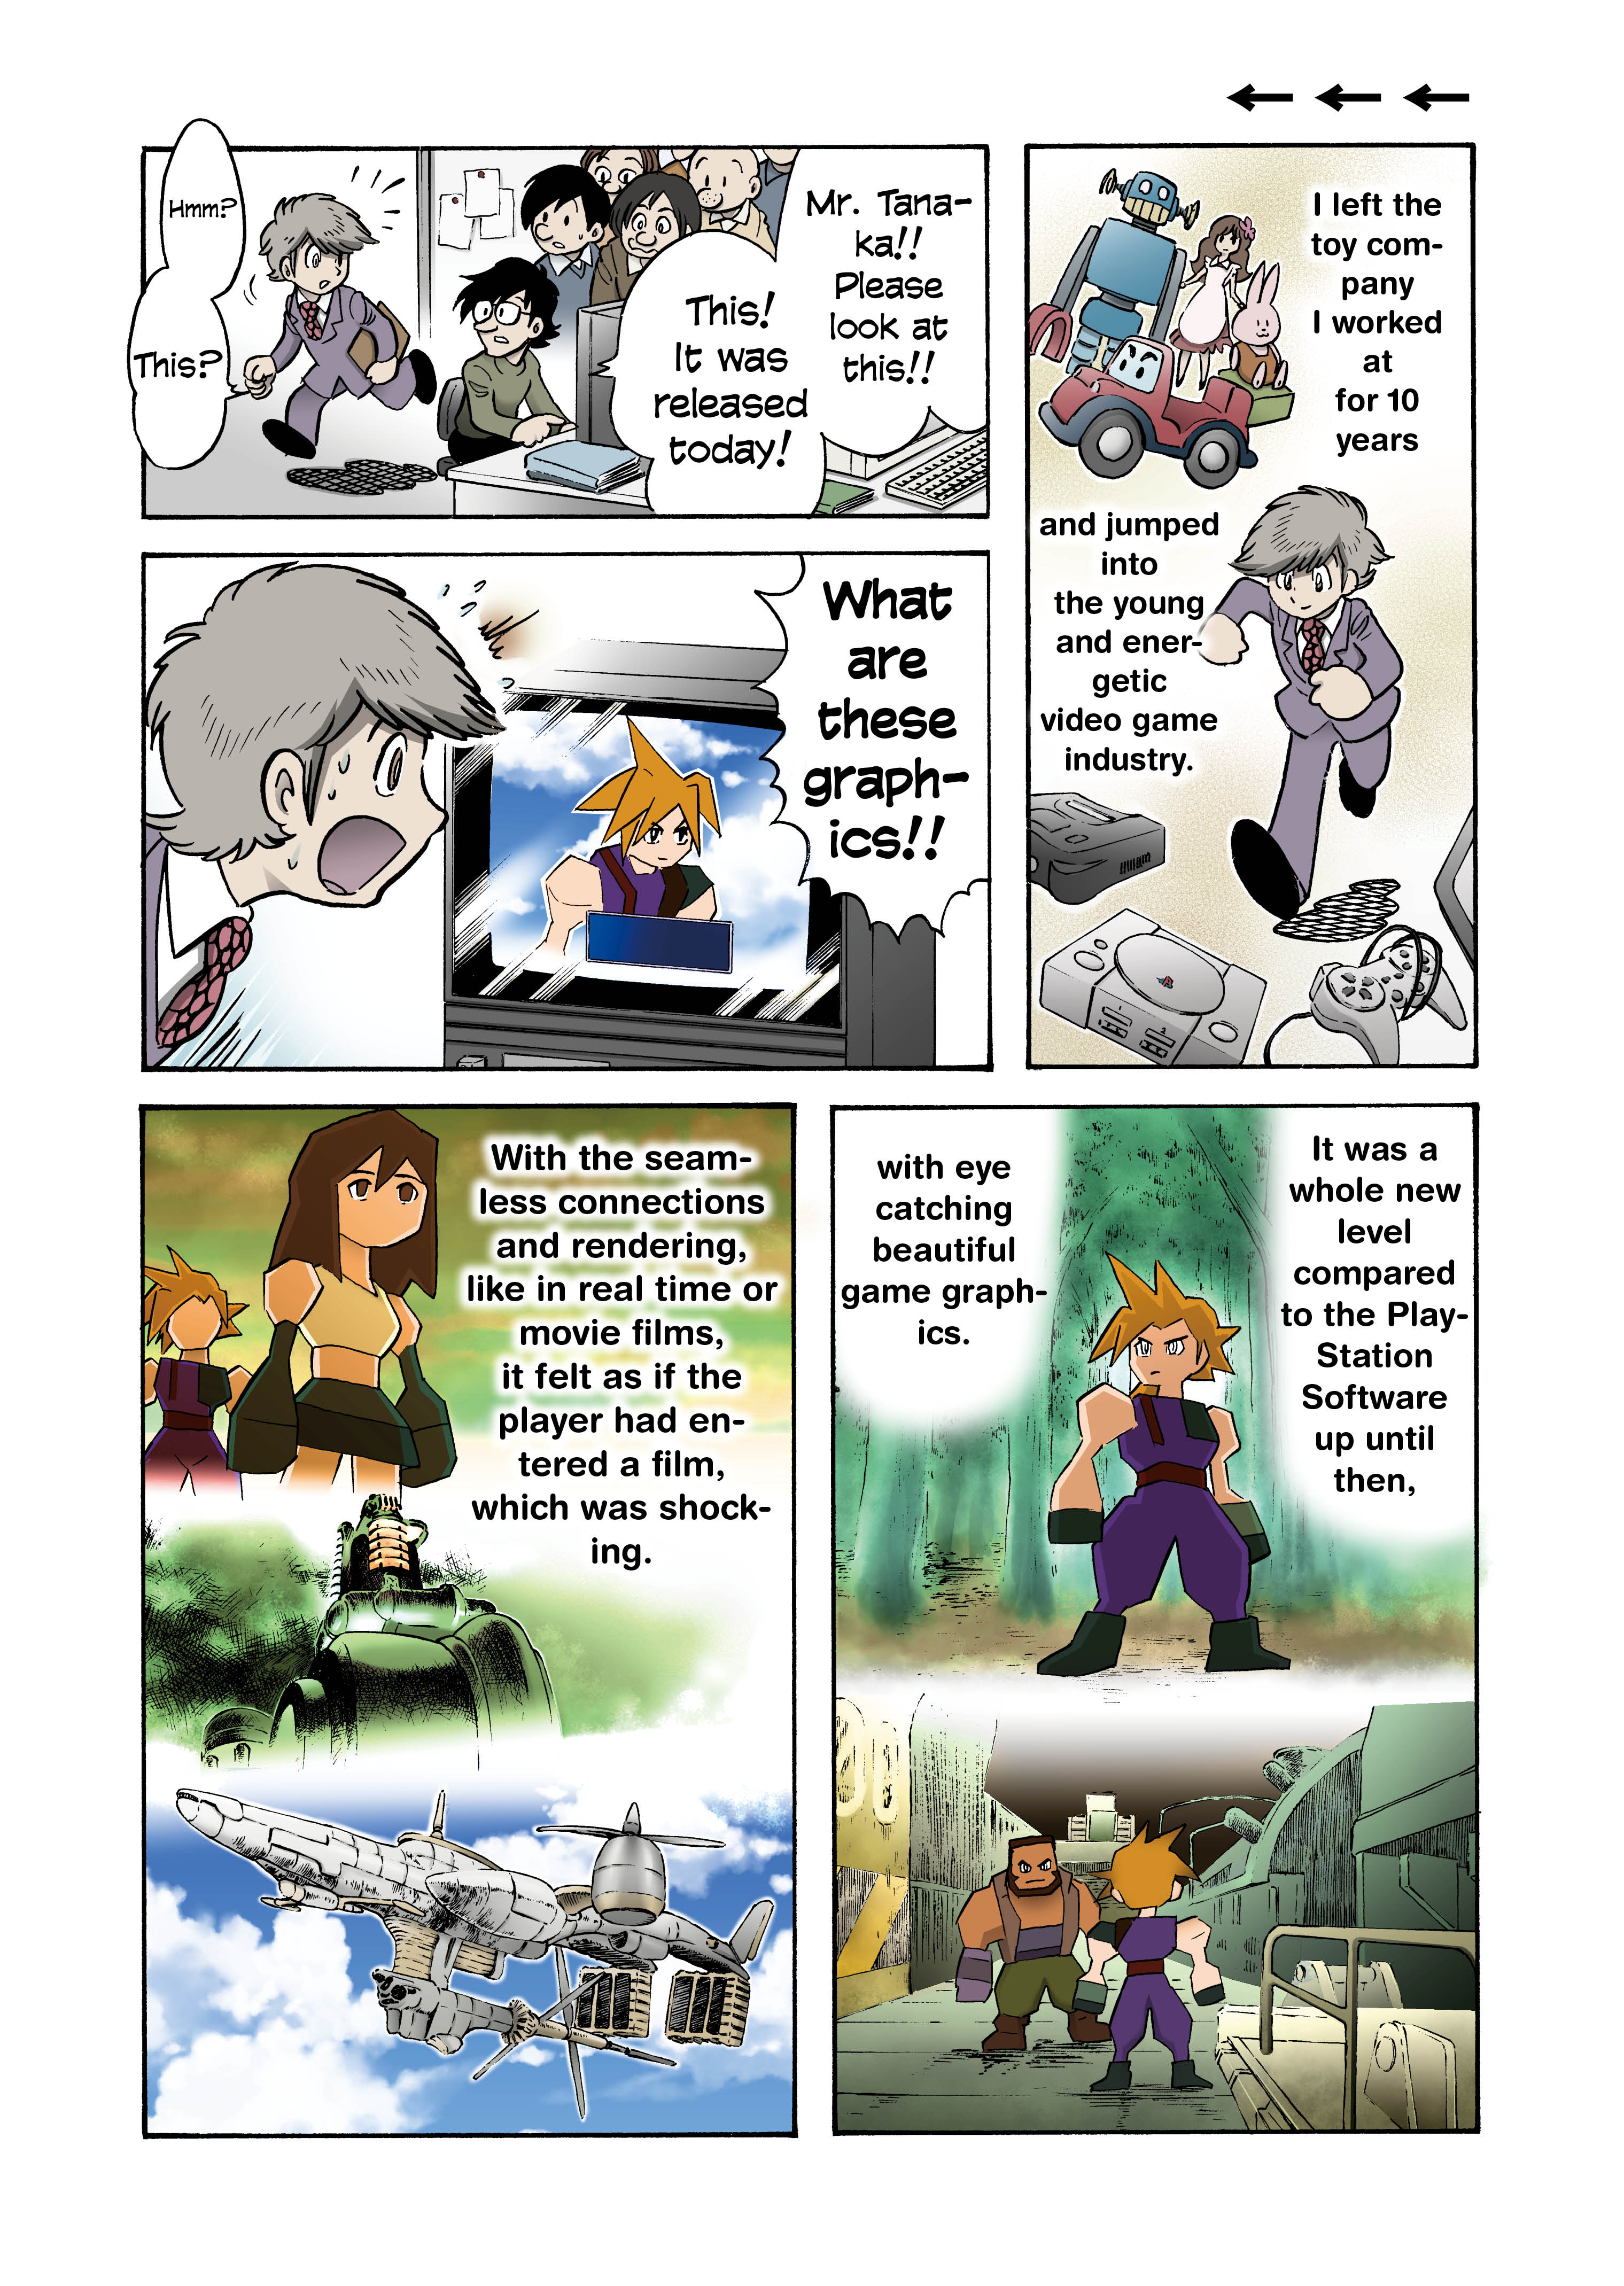 【New Comic Series】Hironobu Sakaguchi and FF programmers’ try to rival DQ [Game Designers in their ‘early’ days]_003